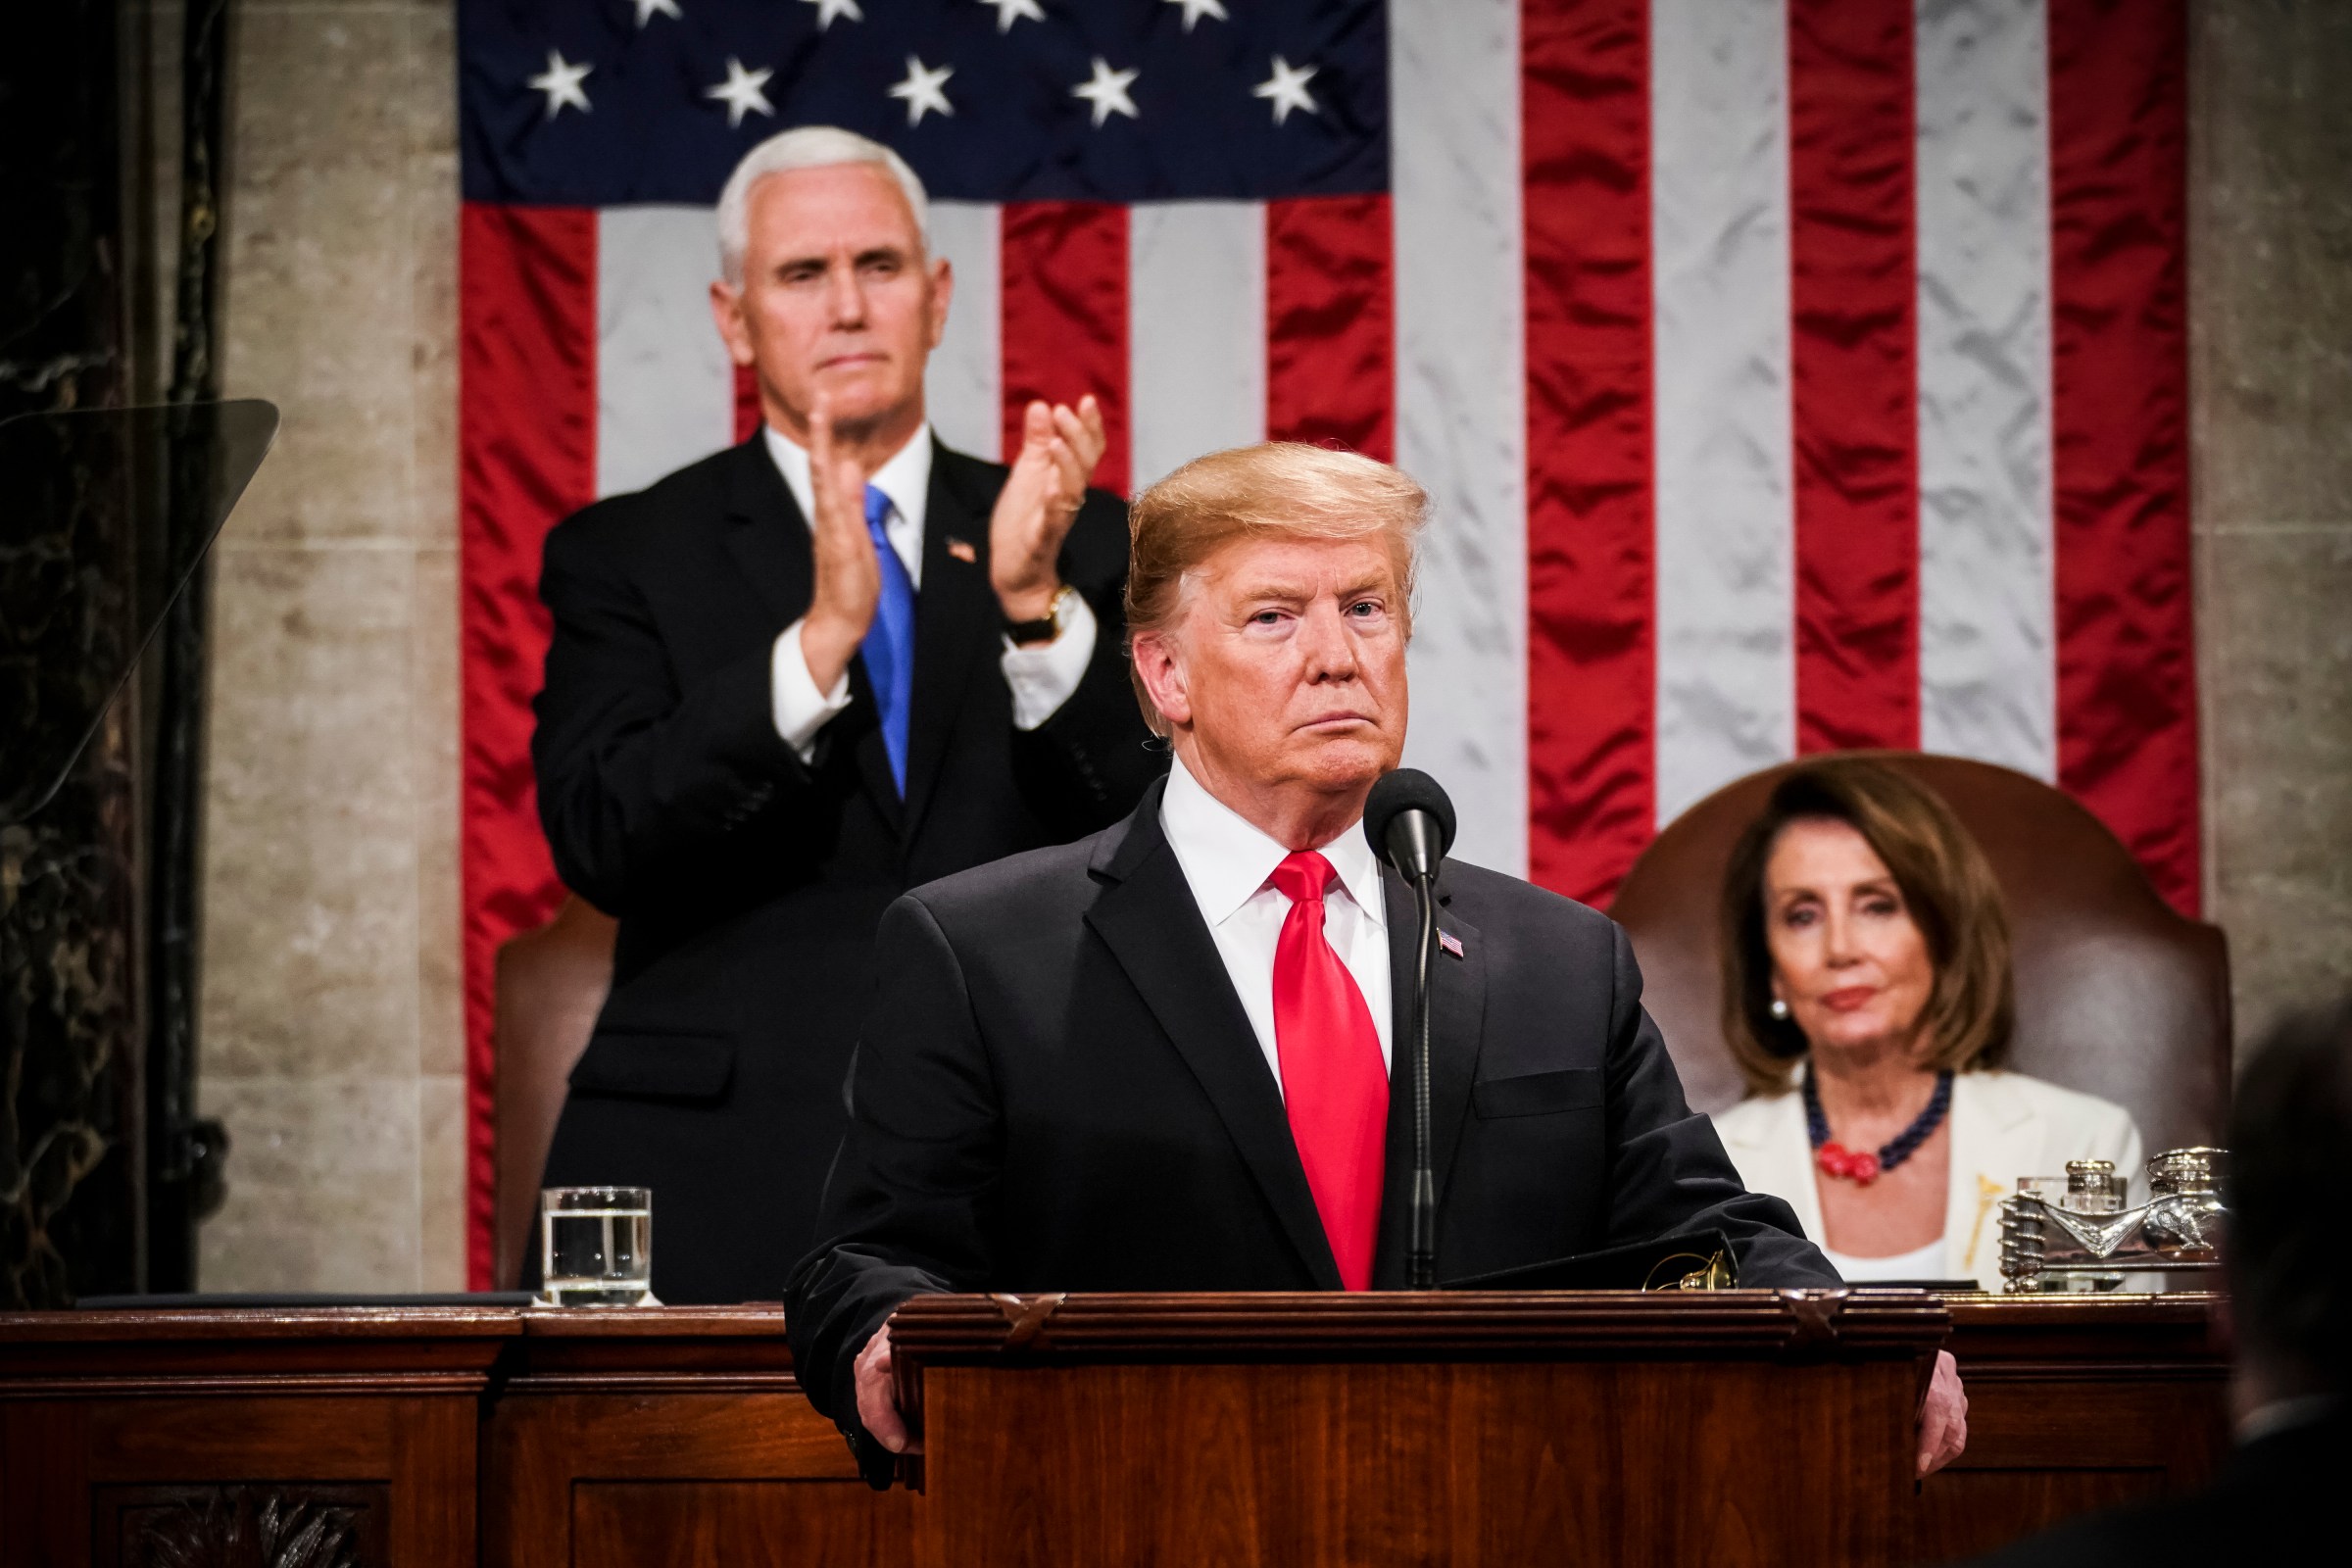 President Trump, with Speaker Nancy Pelosi and Vice President Mike Pence looking on, delivers the State of the Union address on February 5, 2019.